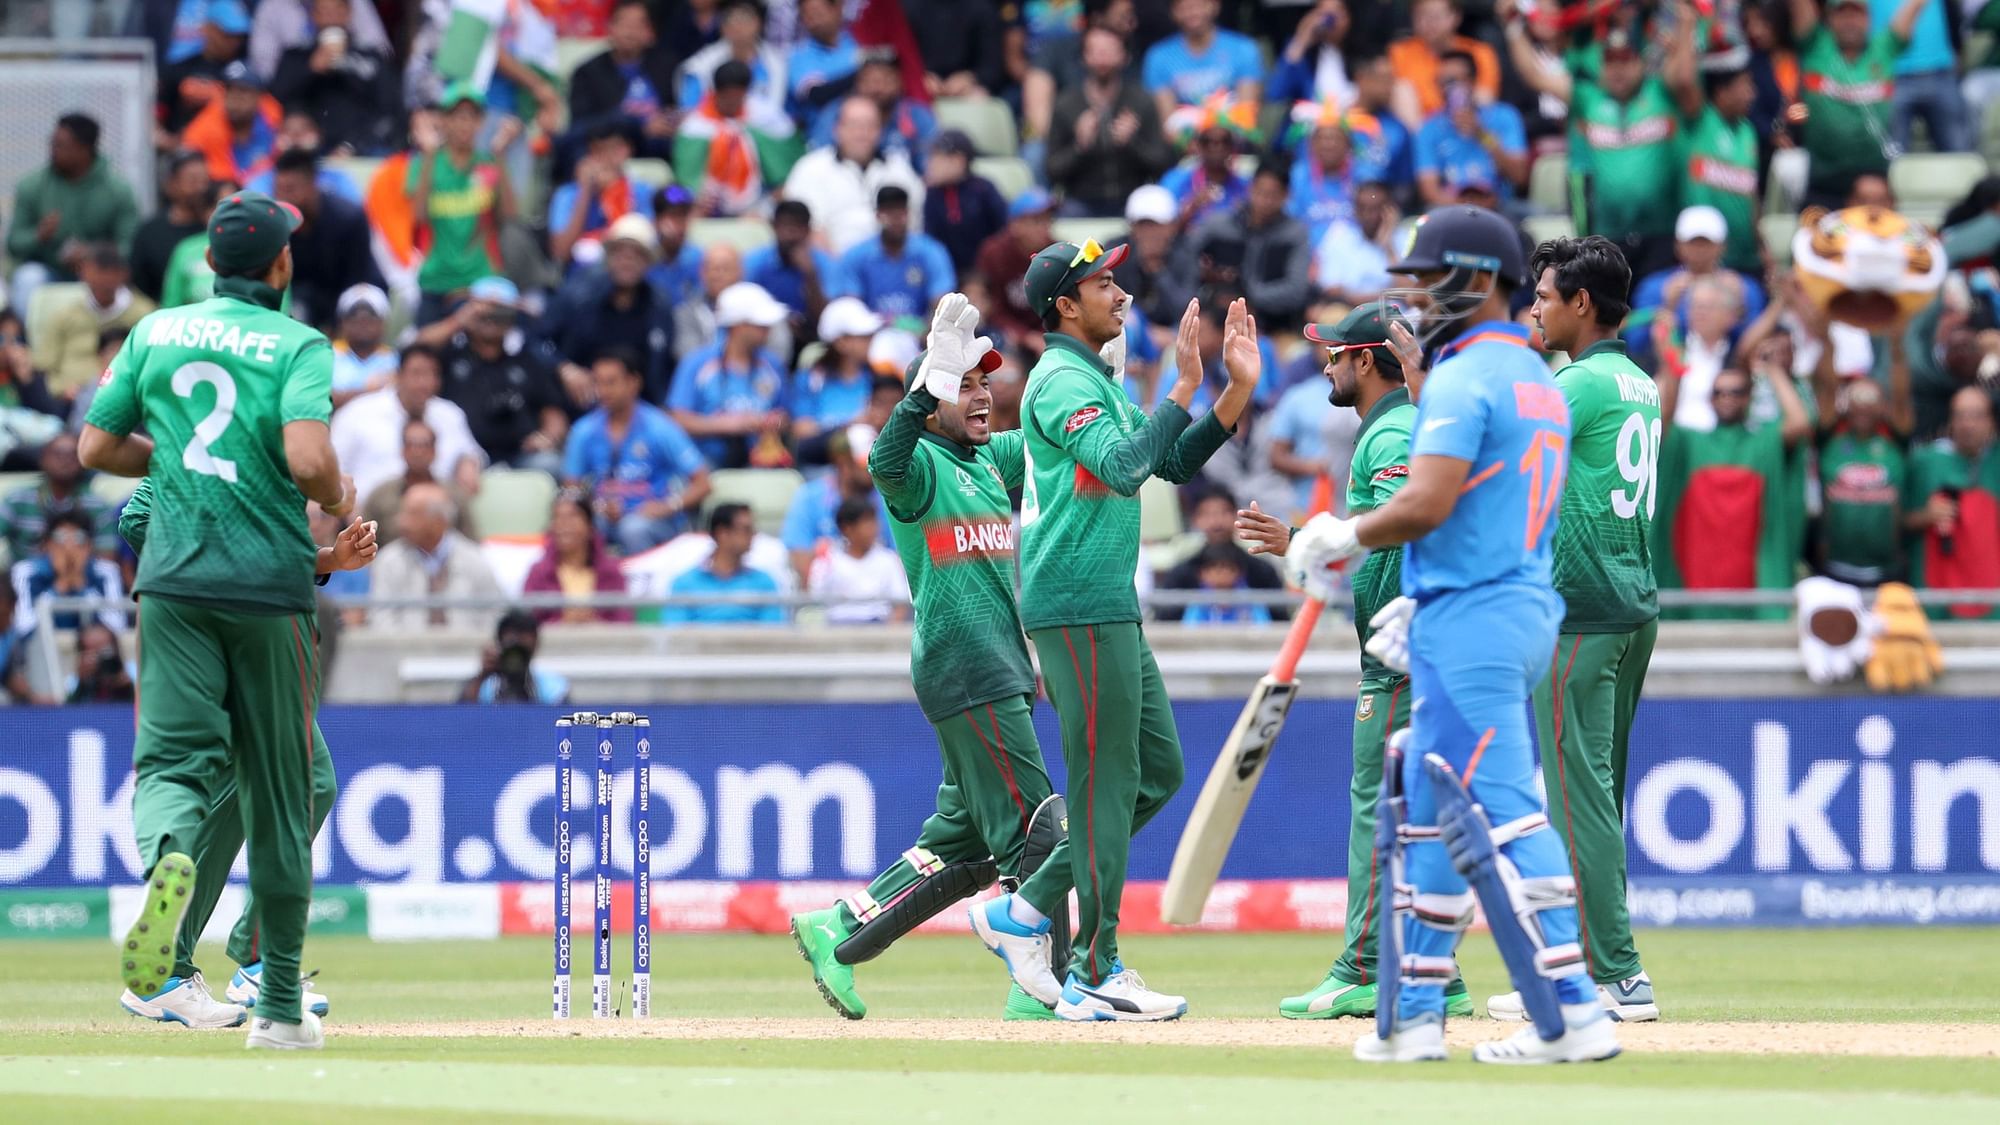 A former Bangladesh cricket chief said Tuesday that match fixing was widespread in the country.